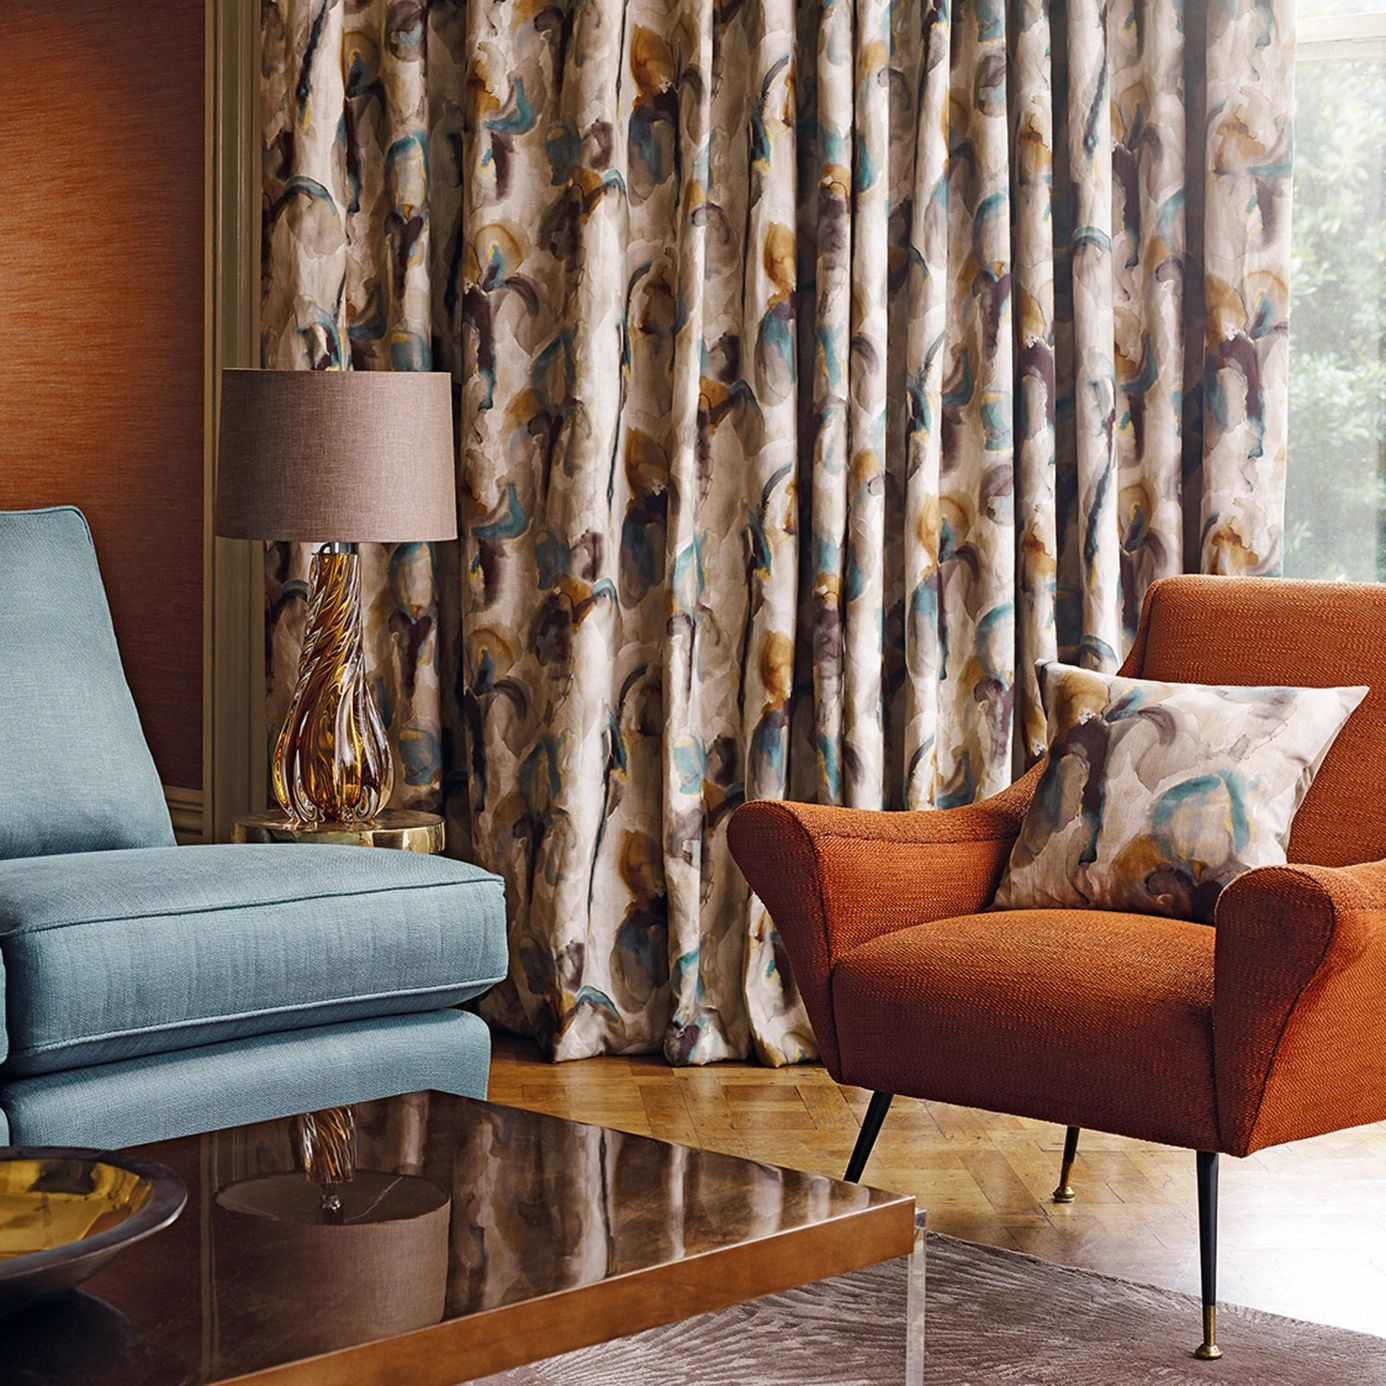 blue chair left, orange chair right with Zoffany fabric cushion and matching curtains